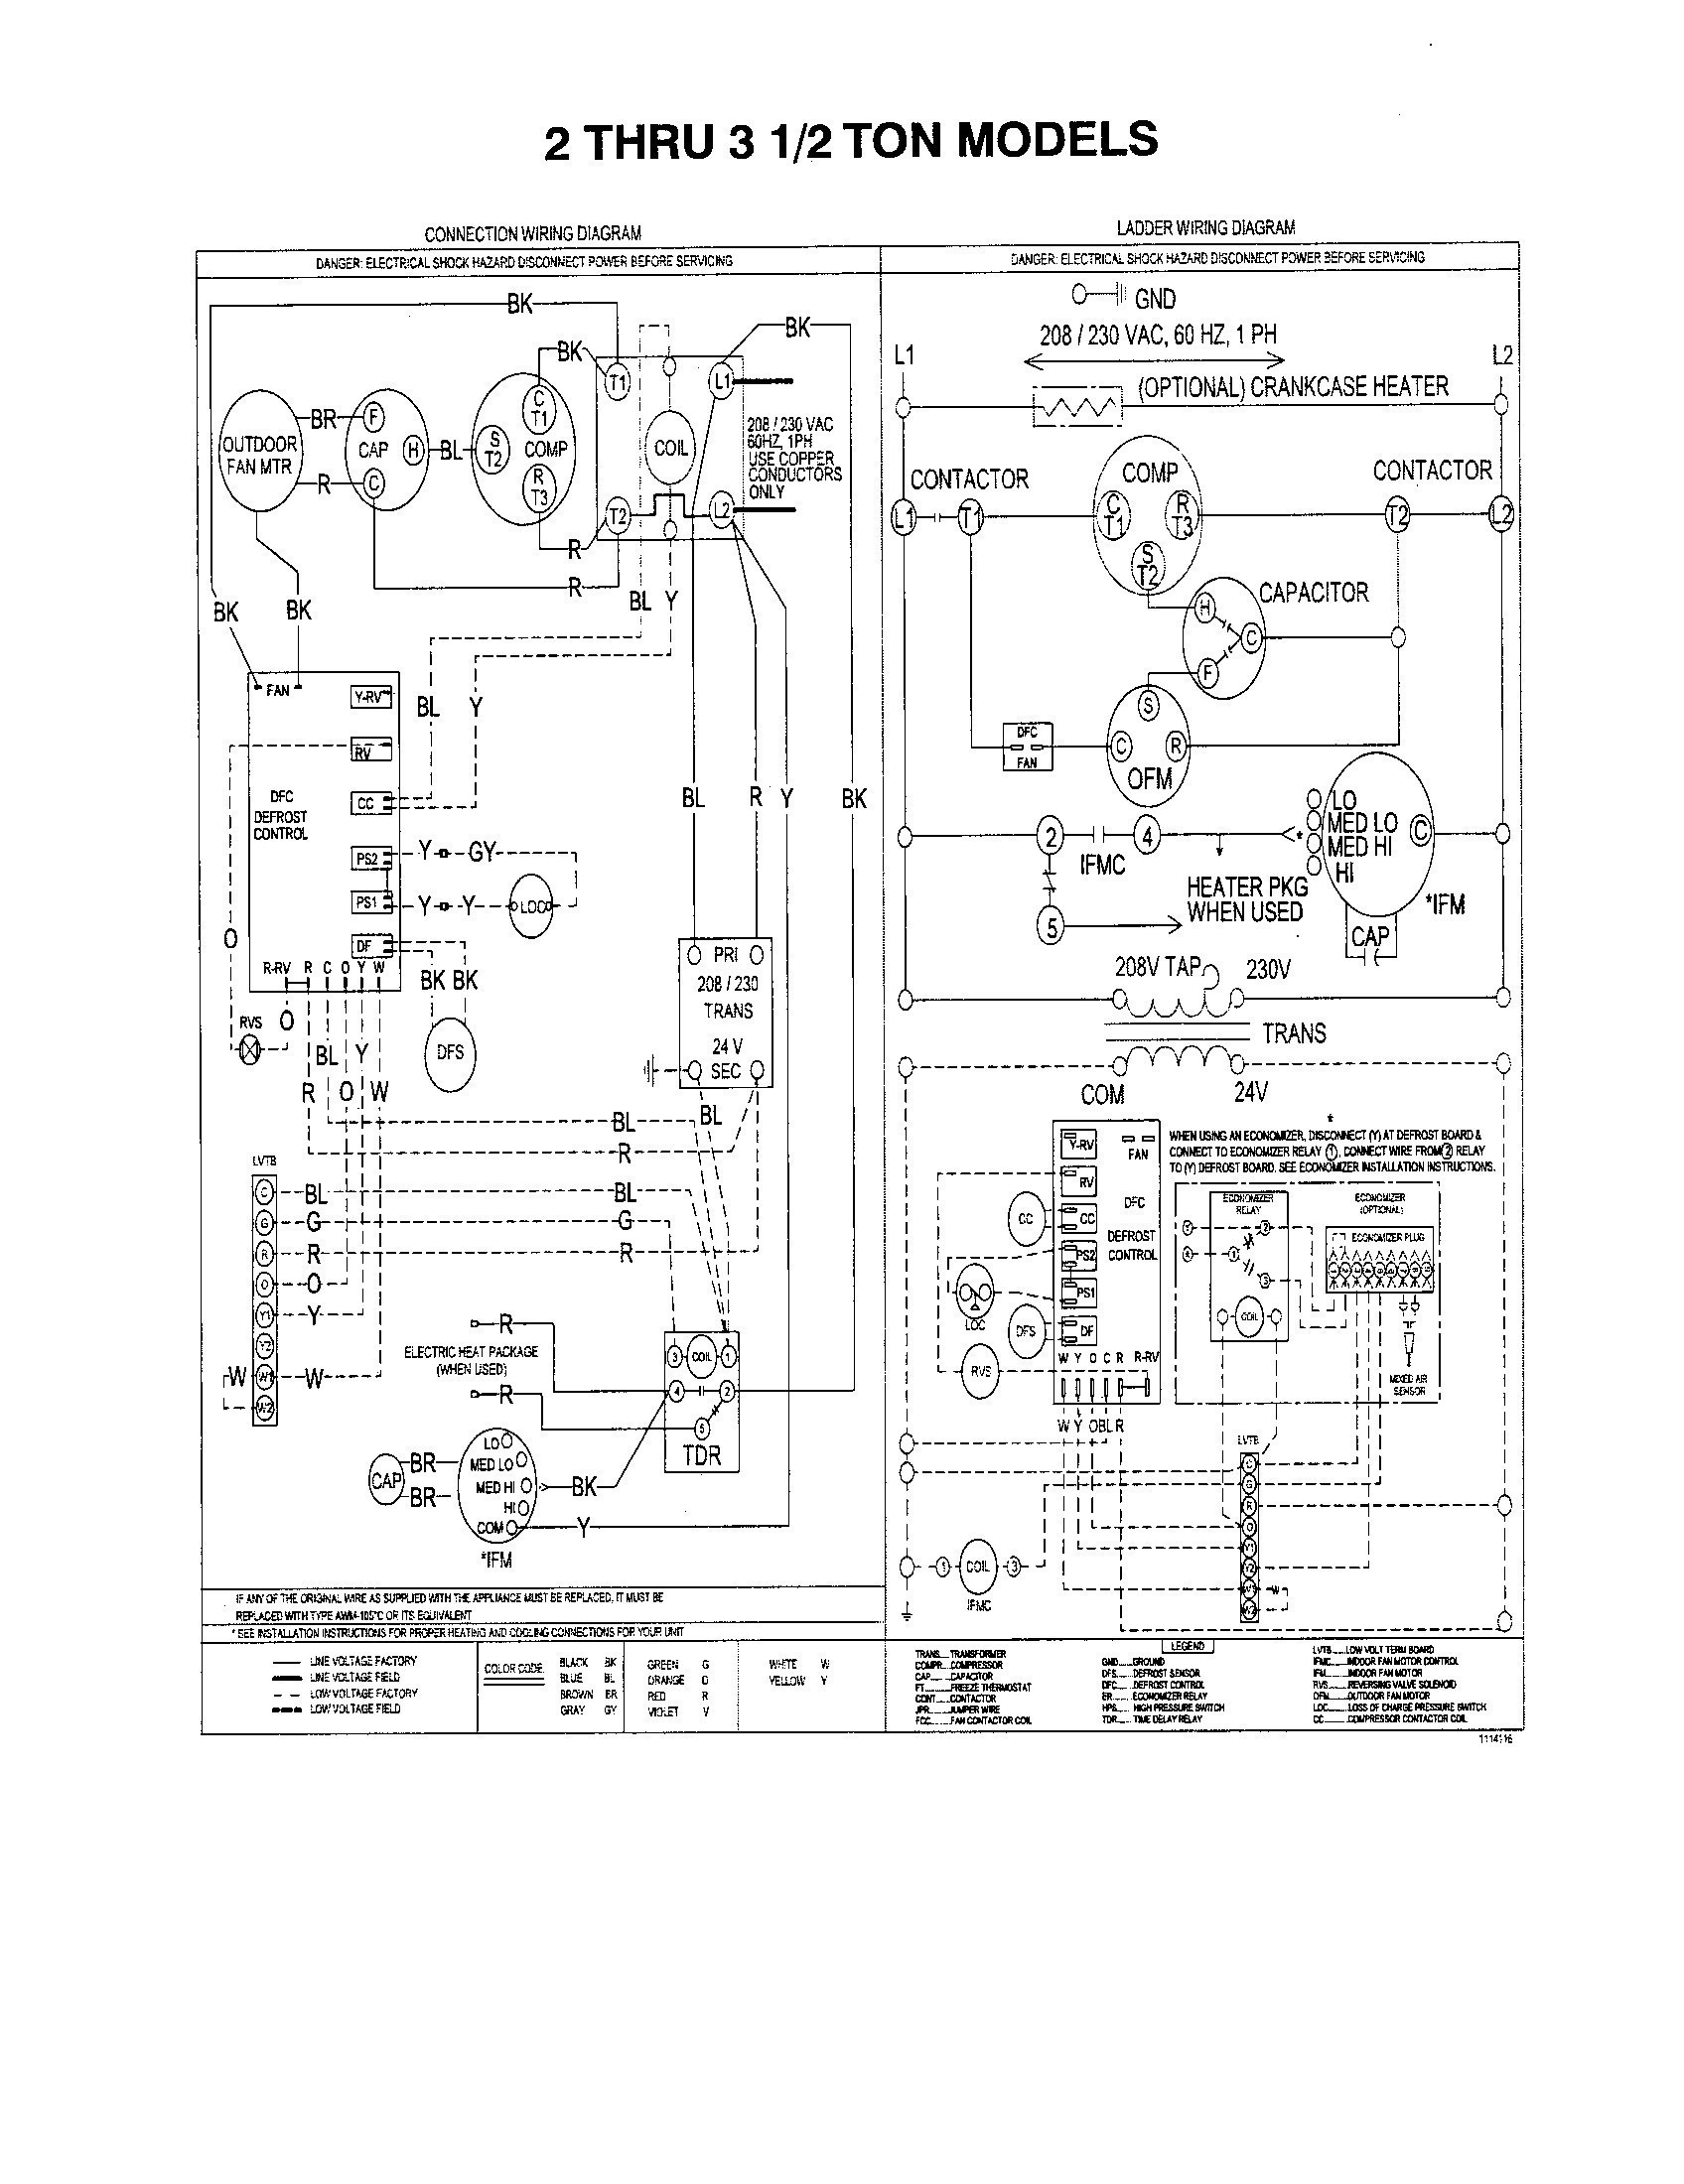 Wiring Diagram for York Air Conditioner Save Wiring Diagram Ac York Valid Wiring Diagram Package Ac